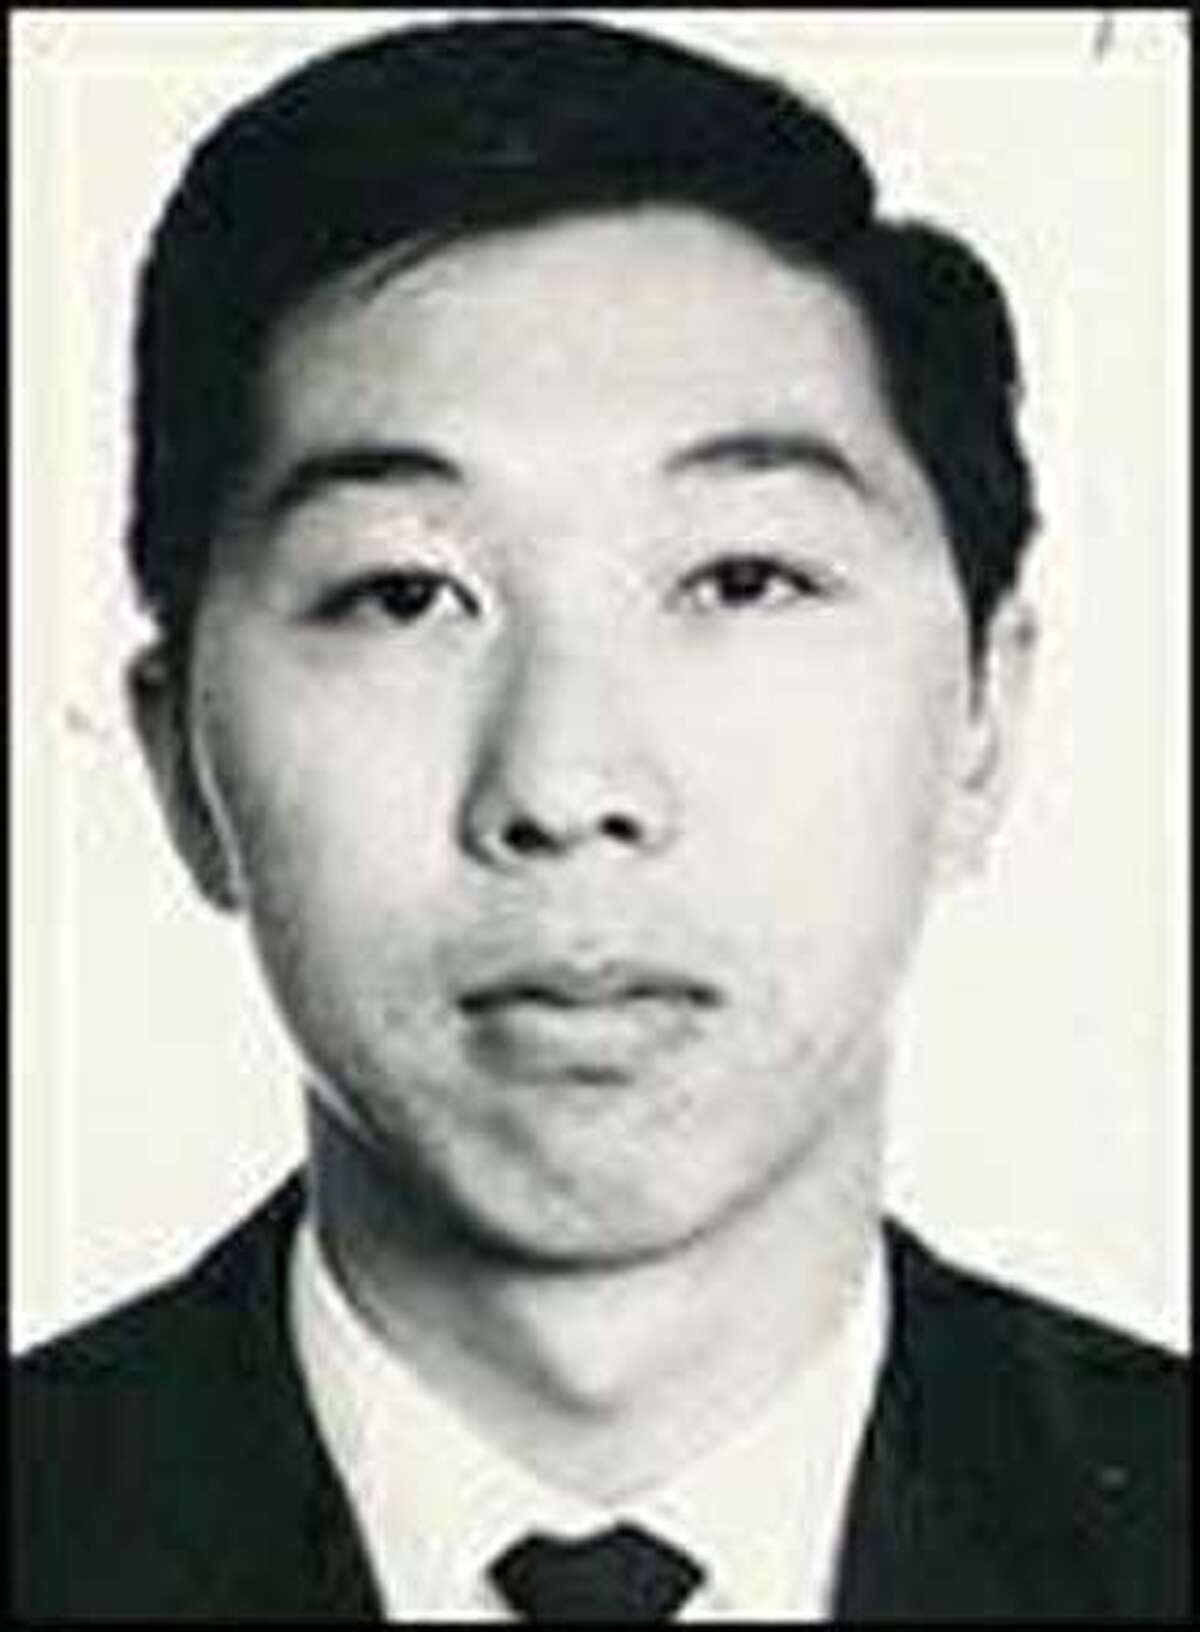 Officer Ronald Tsukamoto Berkeley Police Department Date of Birth: July 29, 1942 Date Appointed: October 1, 1969 End of Watch: August 20, 1970